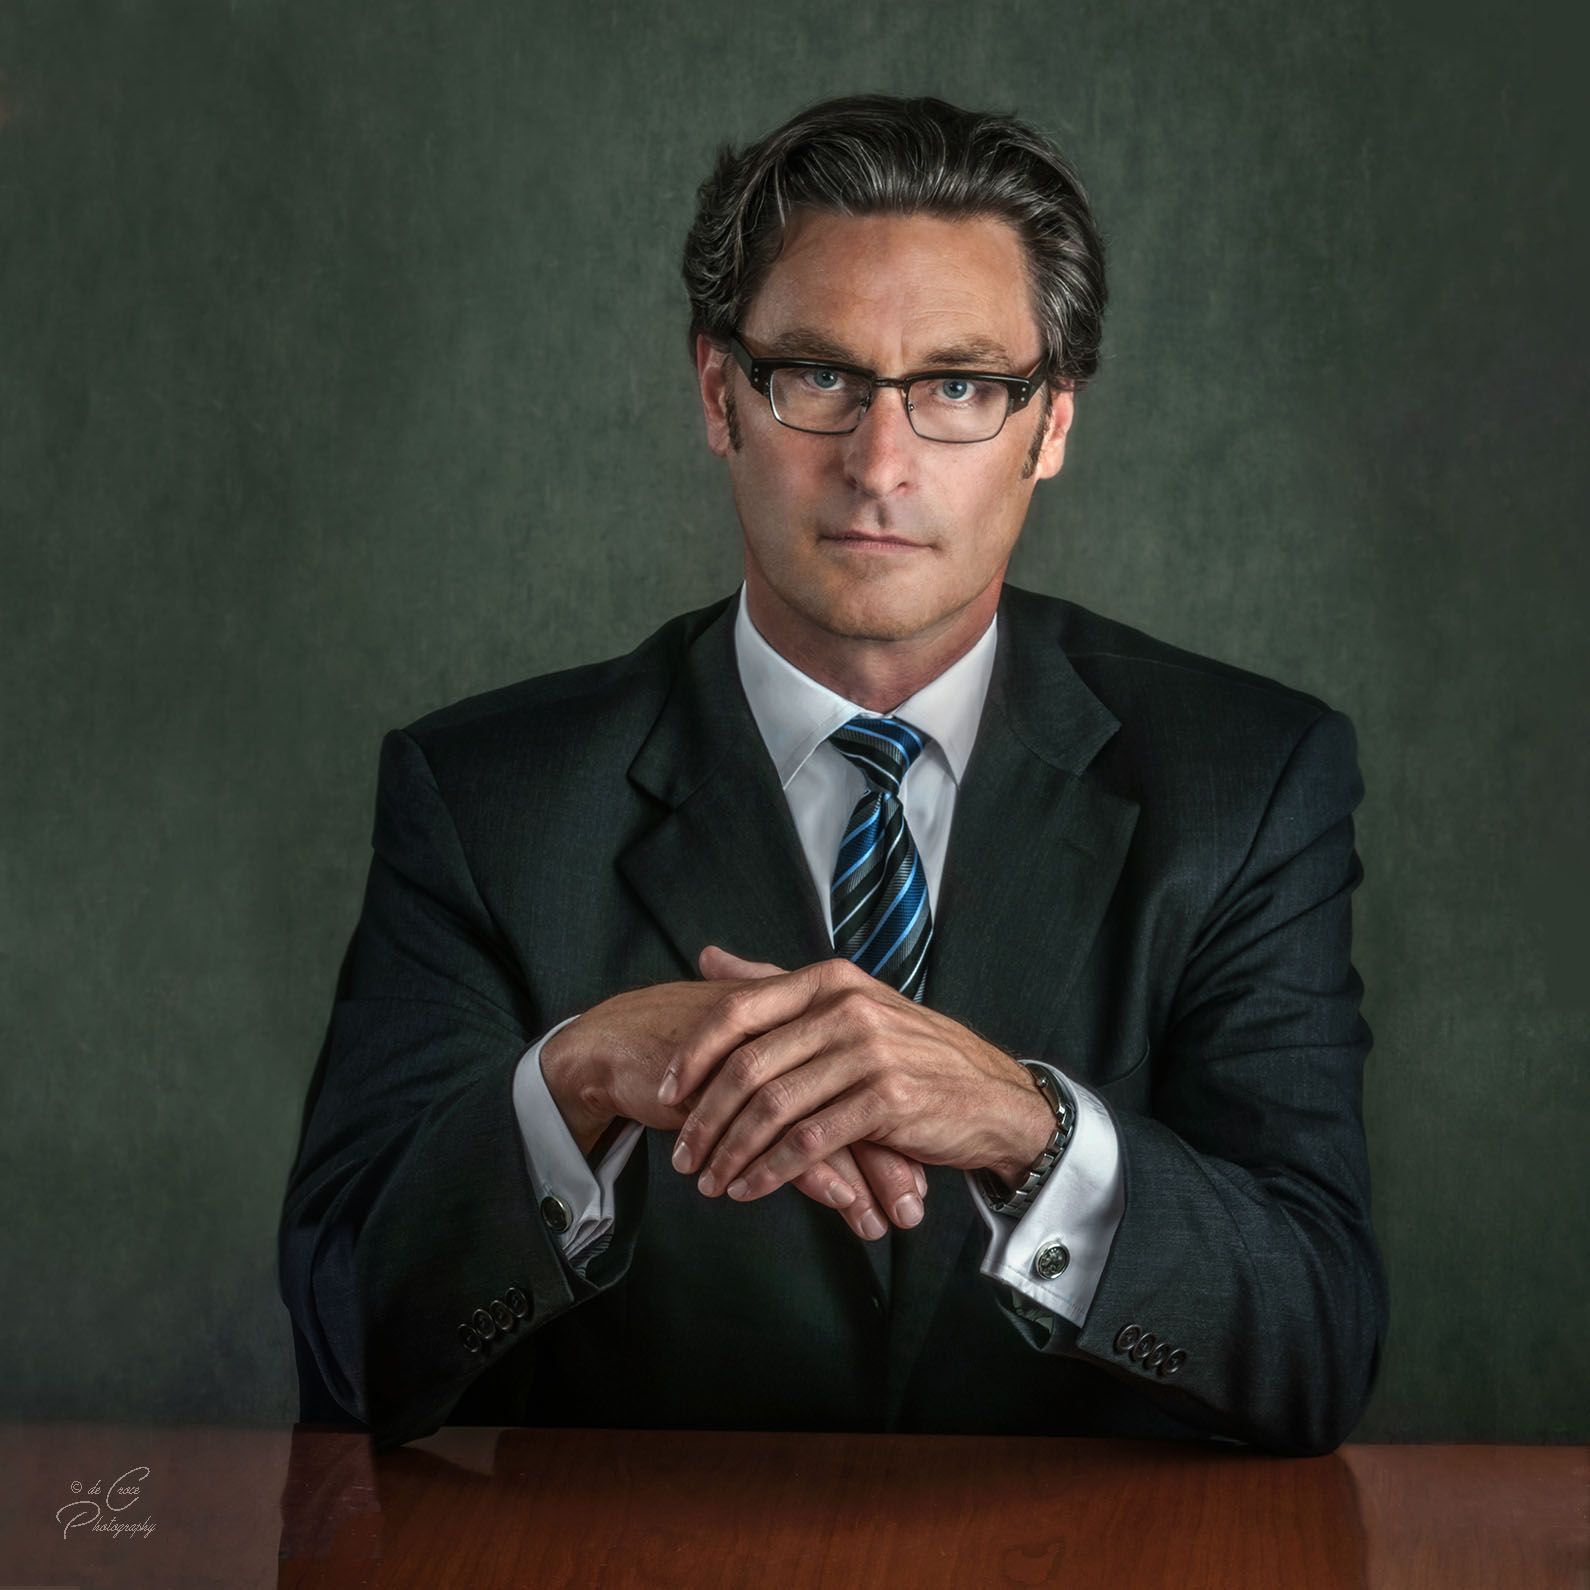 Exectutive Business Portrait Contemorary